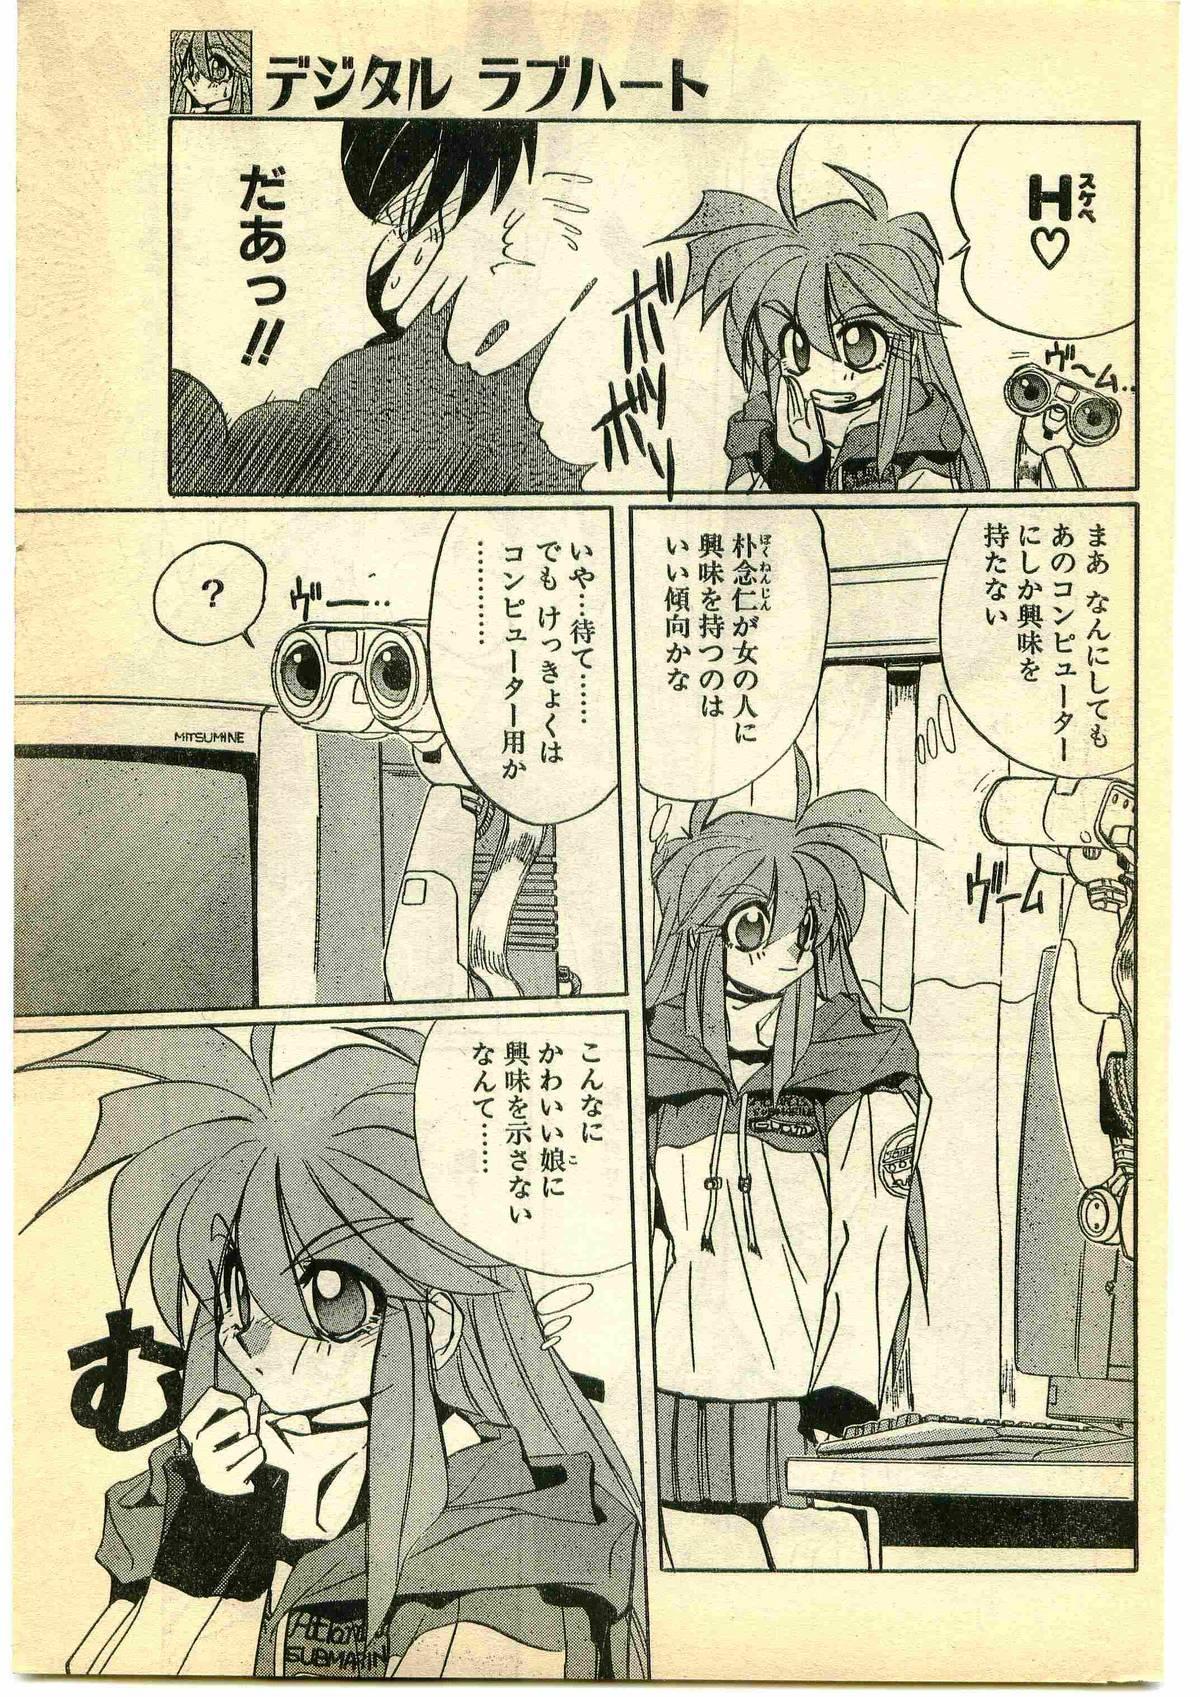 Moms COMIC Papipo Gaiden 1995-05 Penetration - Page 9